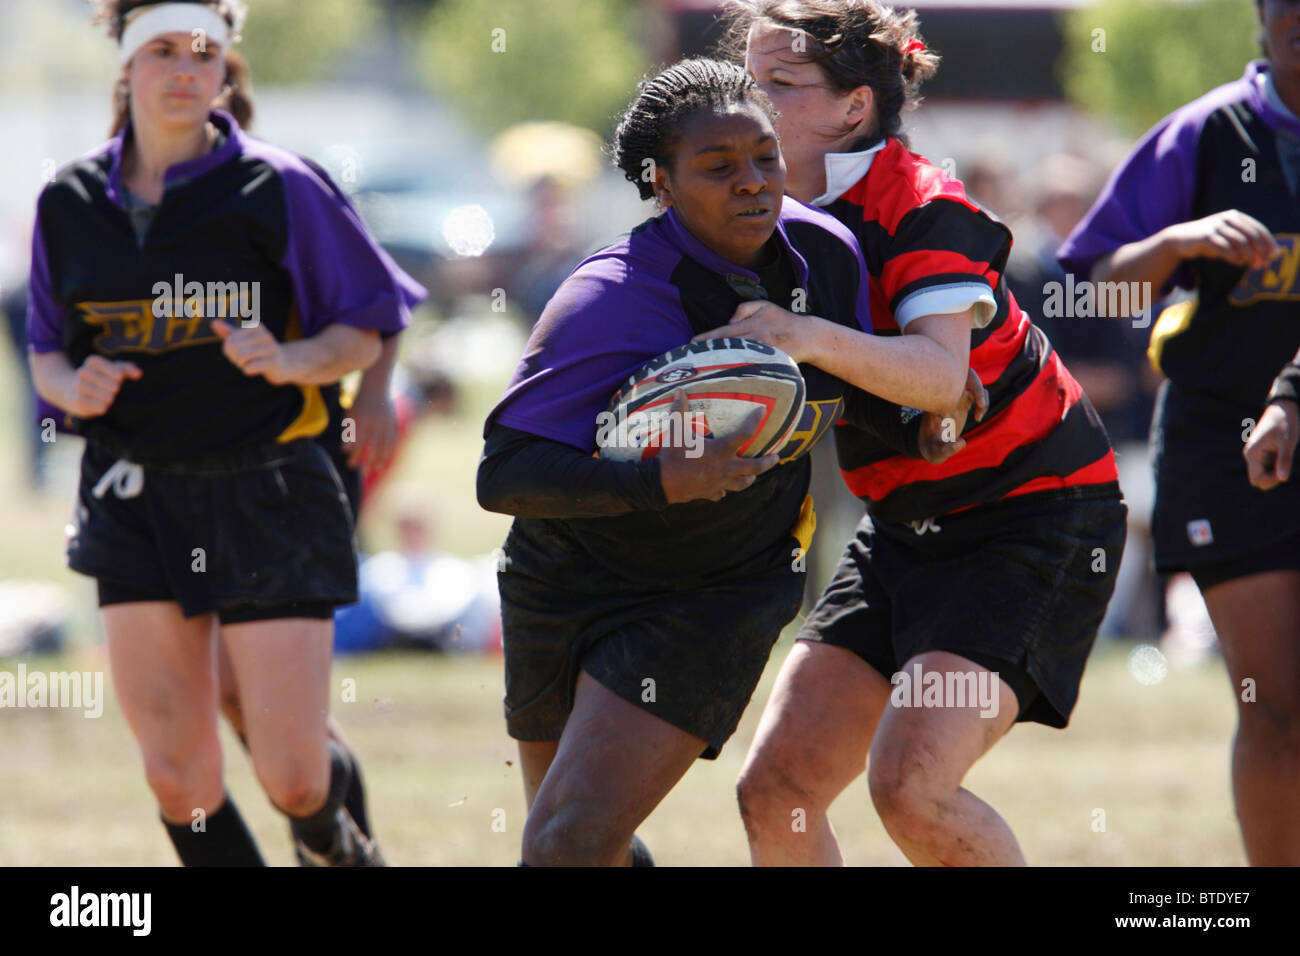 An Eastern Carolina University rugby player carries the ball during a match at the annual Cherry Blossom Rugby Tournament. Stock Photo